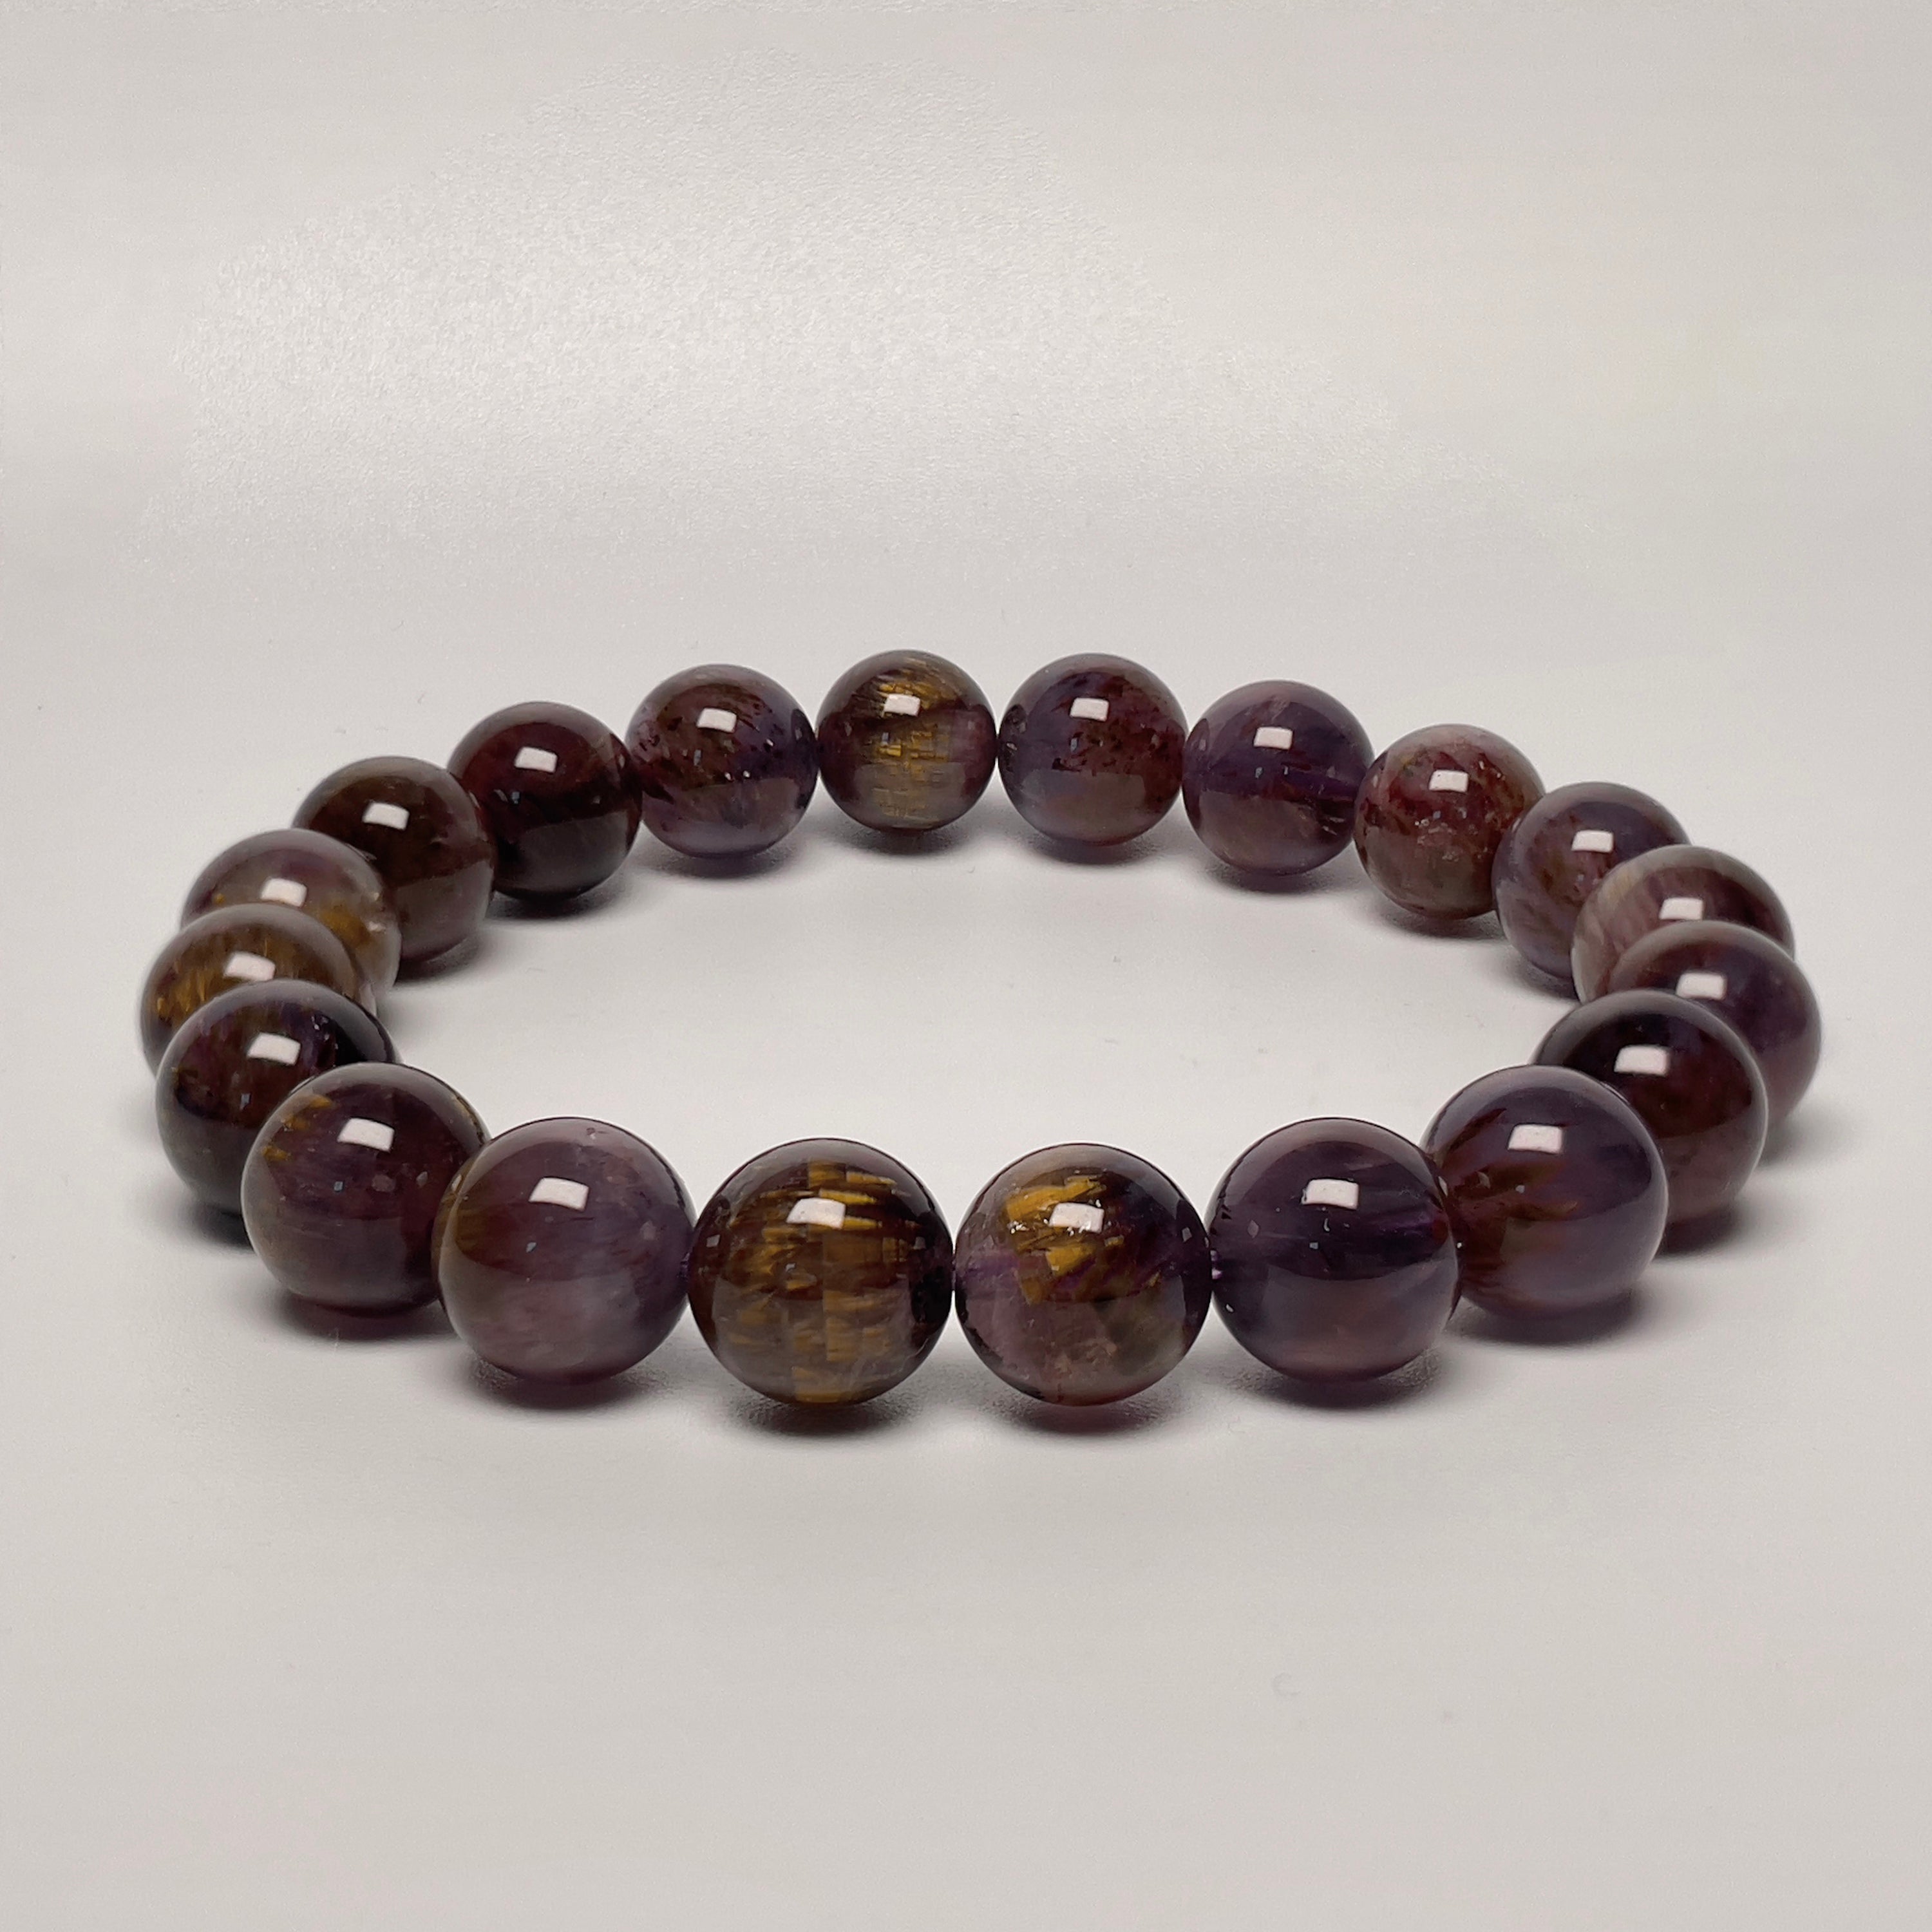 Delhi Crystals - Auralite 23 - 8mm Bracelet😍 One of the most sought after  variants of Amethyst from the mine's of Canada!🥳 Auralite 23 switches off  the chattering mind, instilling laser-sharp clarity